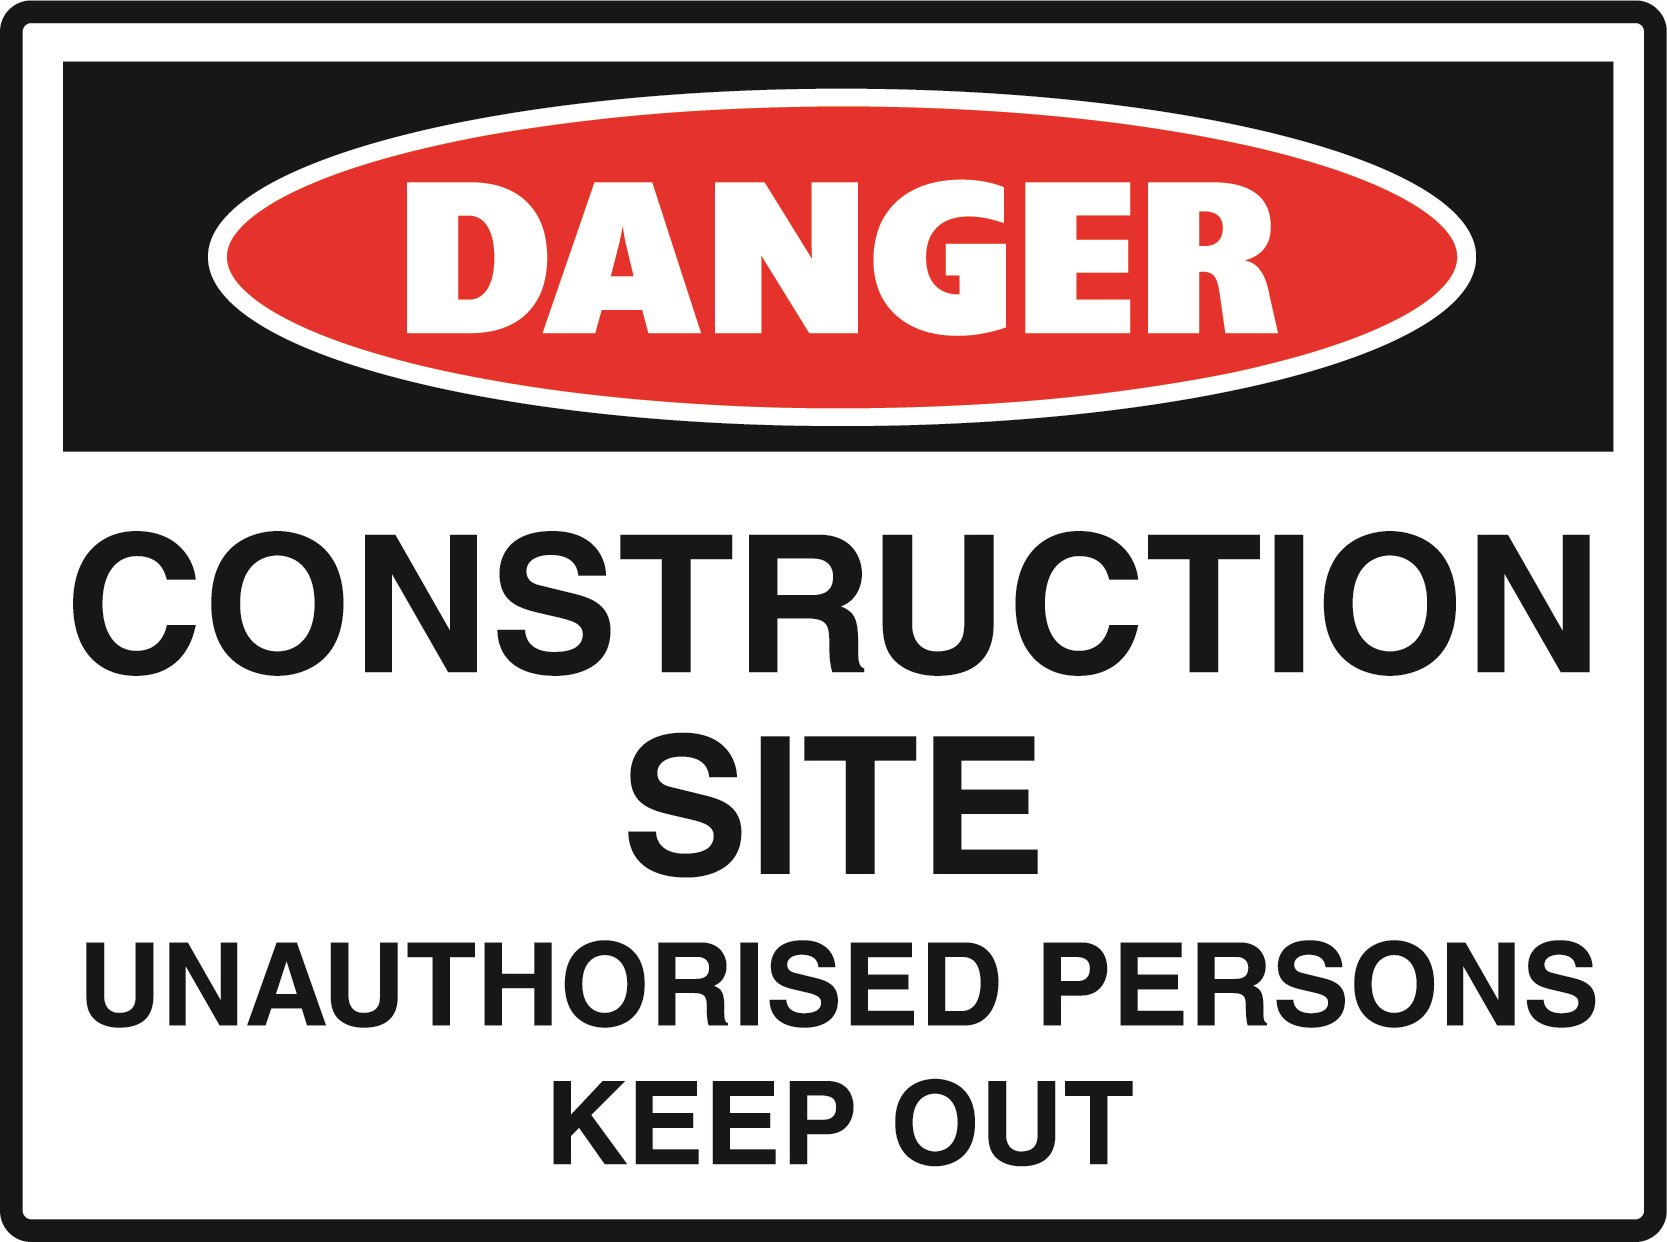 Danger - Construction Site Unauthorised Persons Keep Out